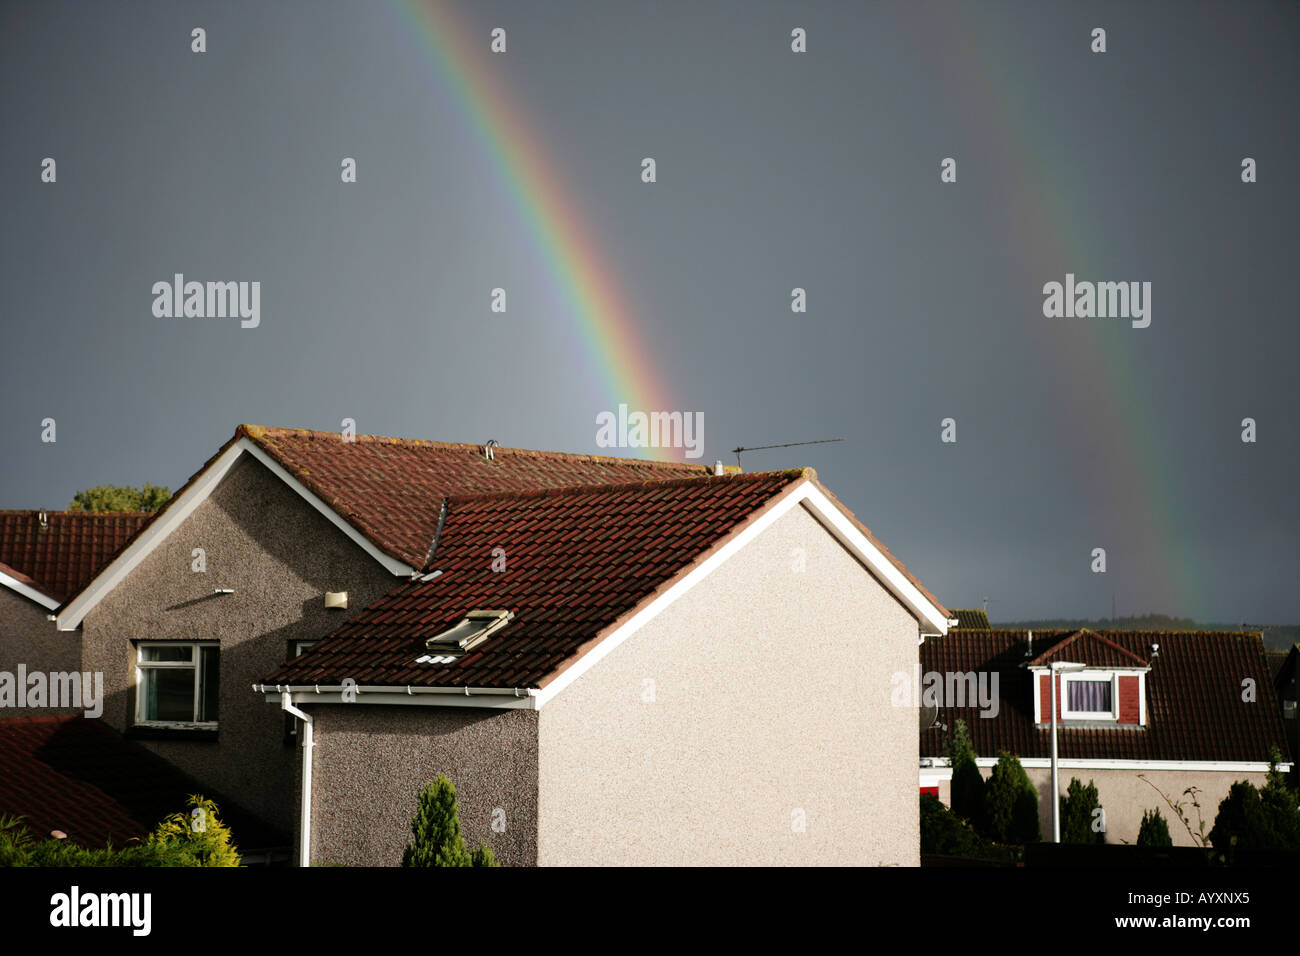 Two rainbows leading into two residential houses against a dark moody sky. Stock Photo